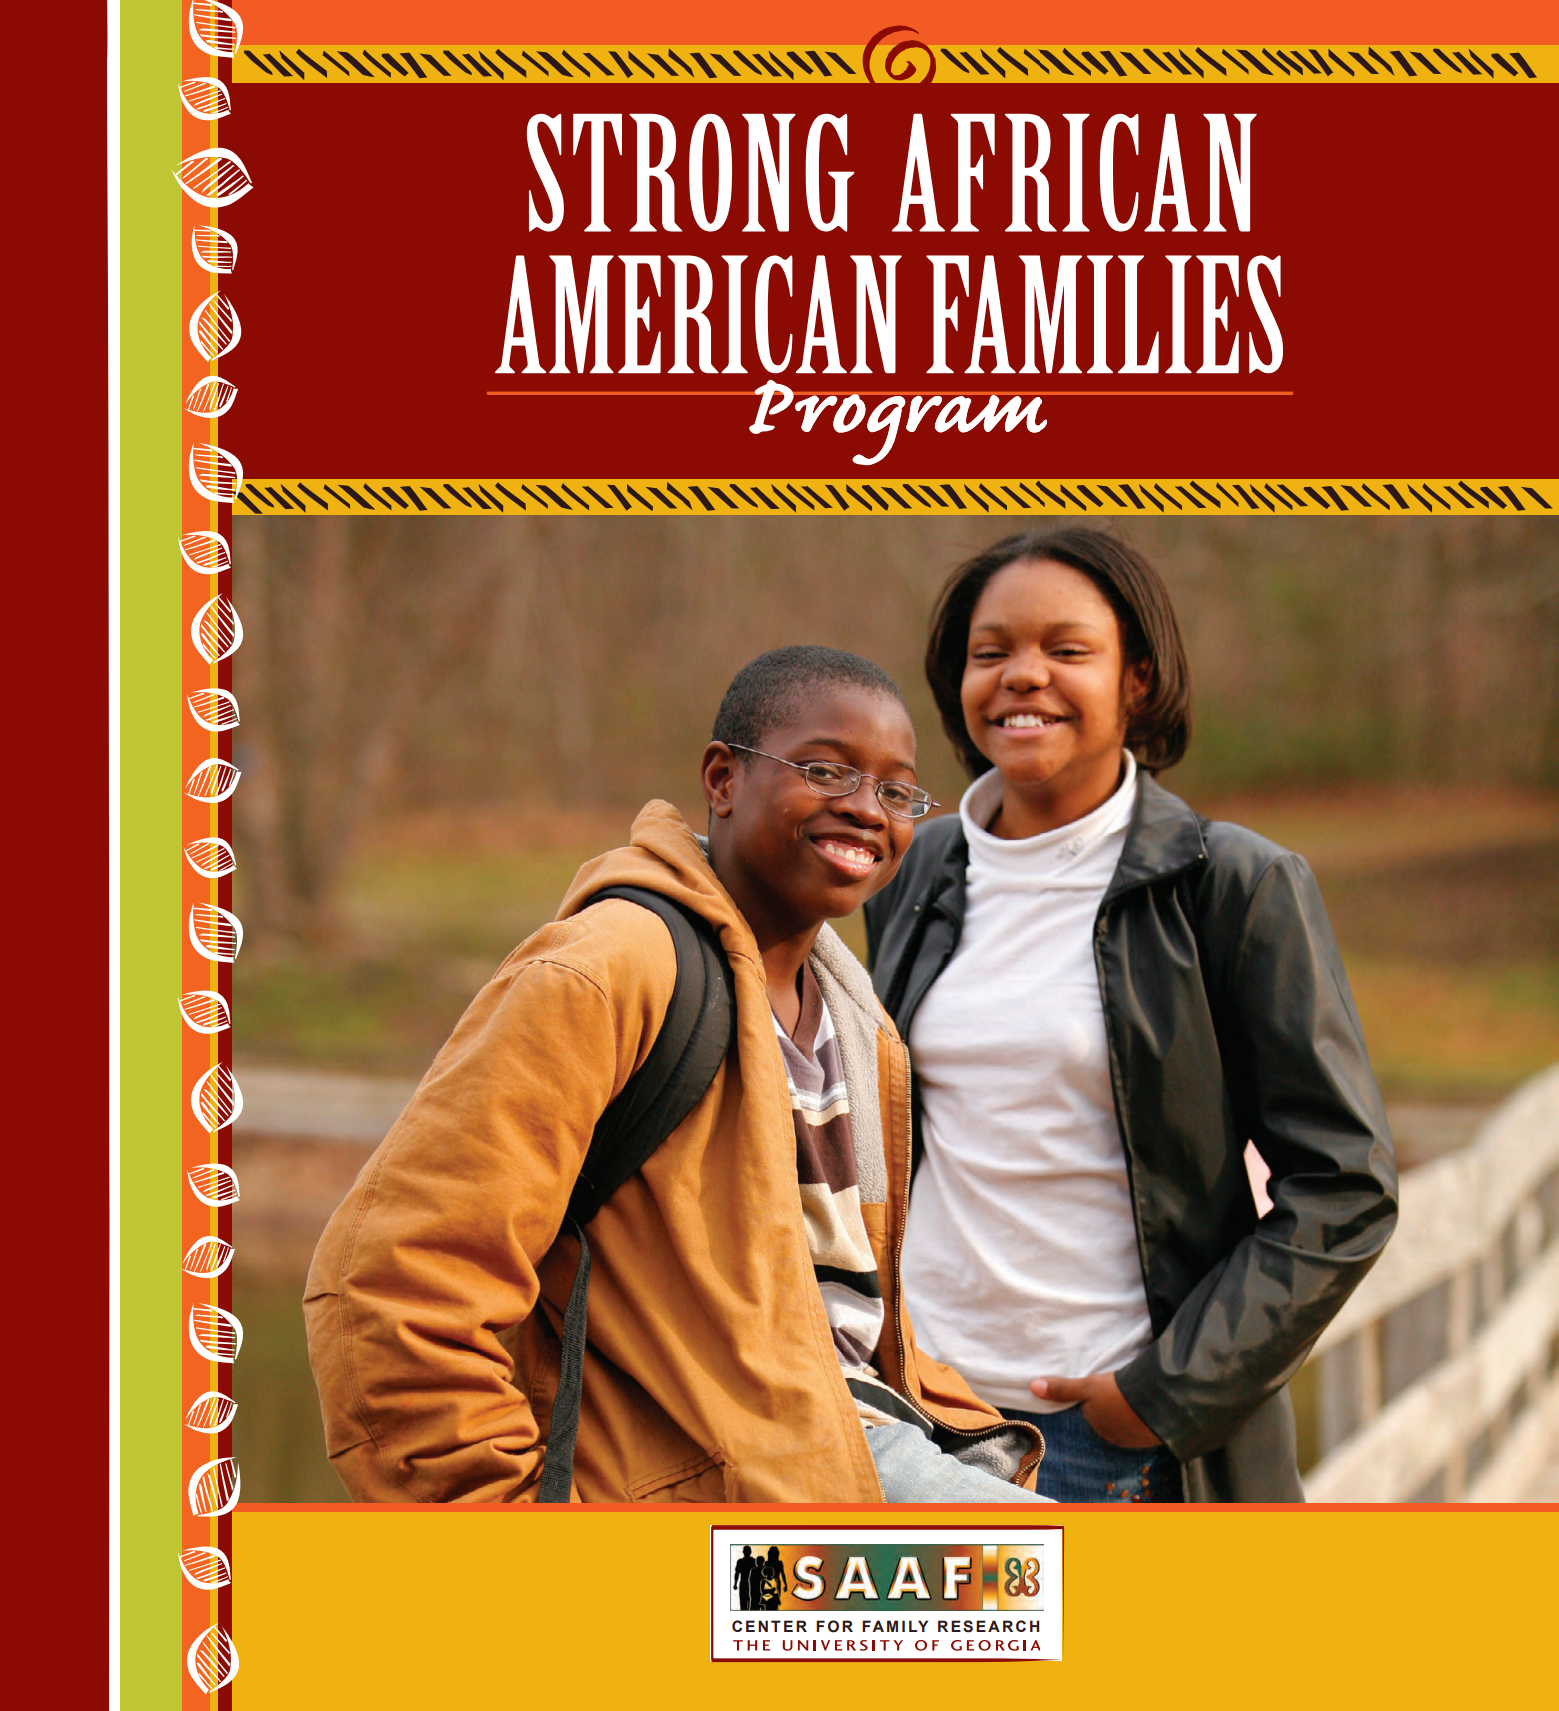 Strong African American Families program manual cover (previous)